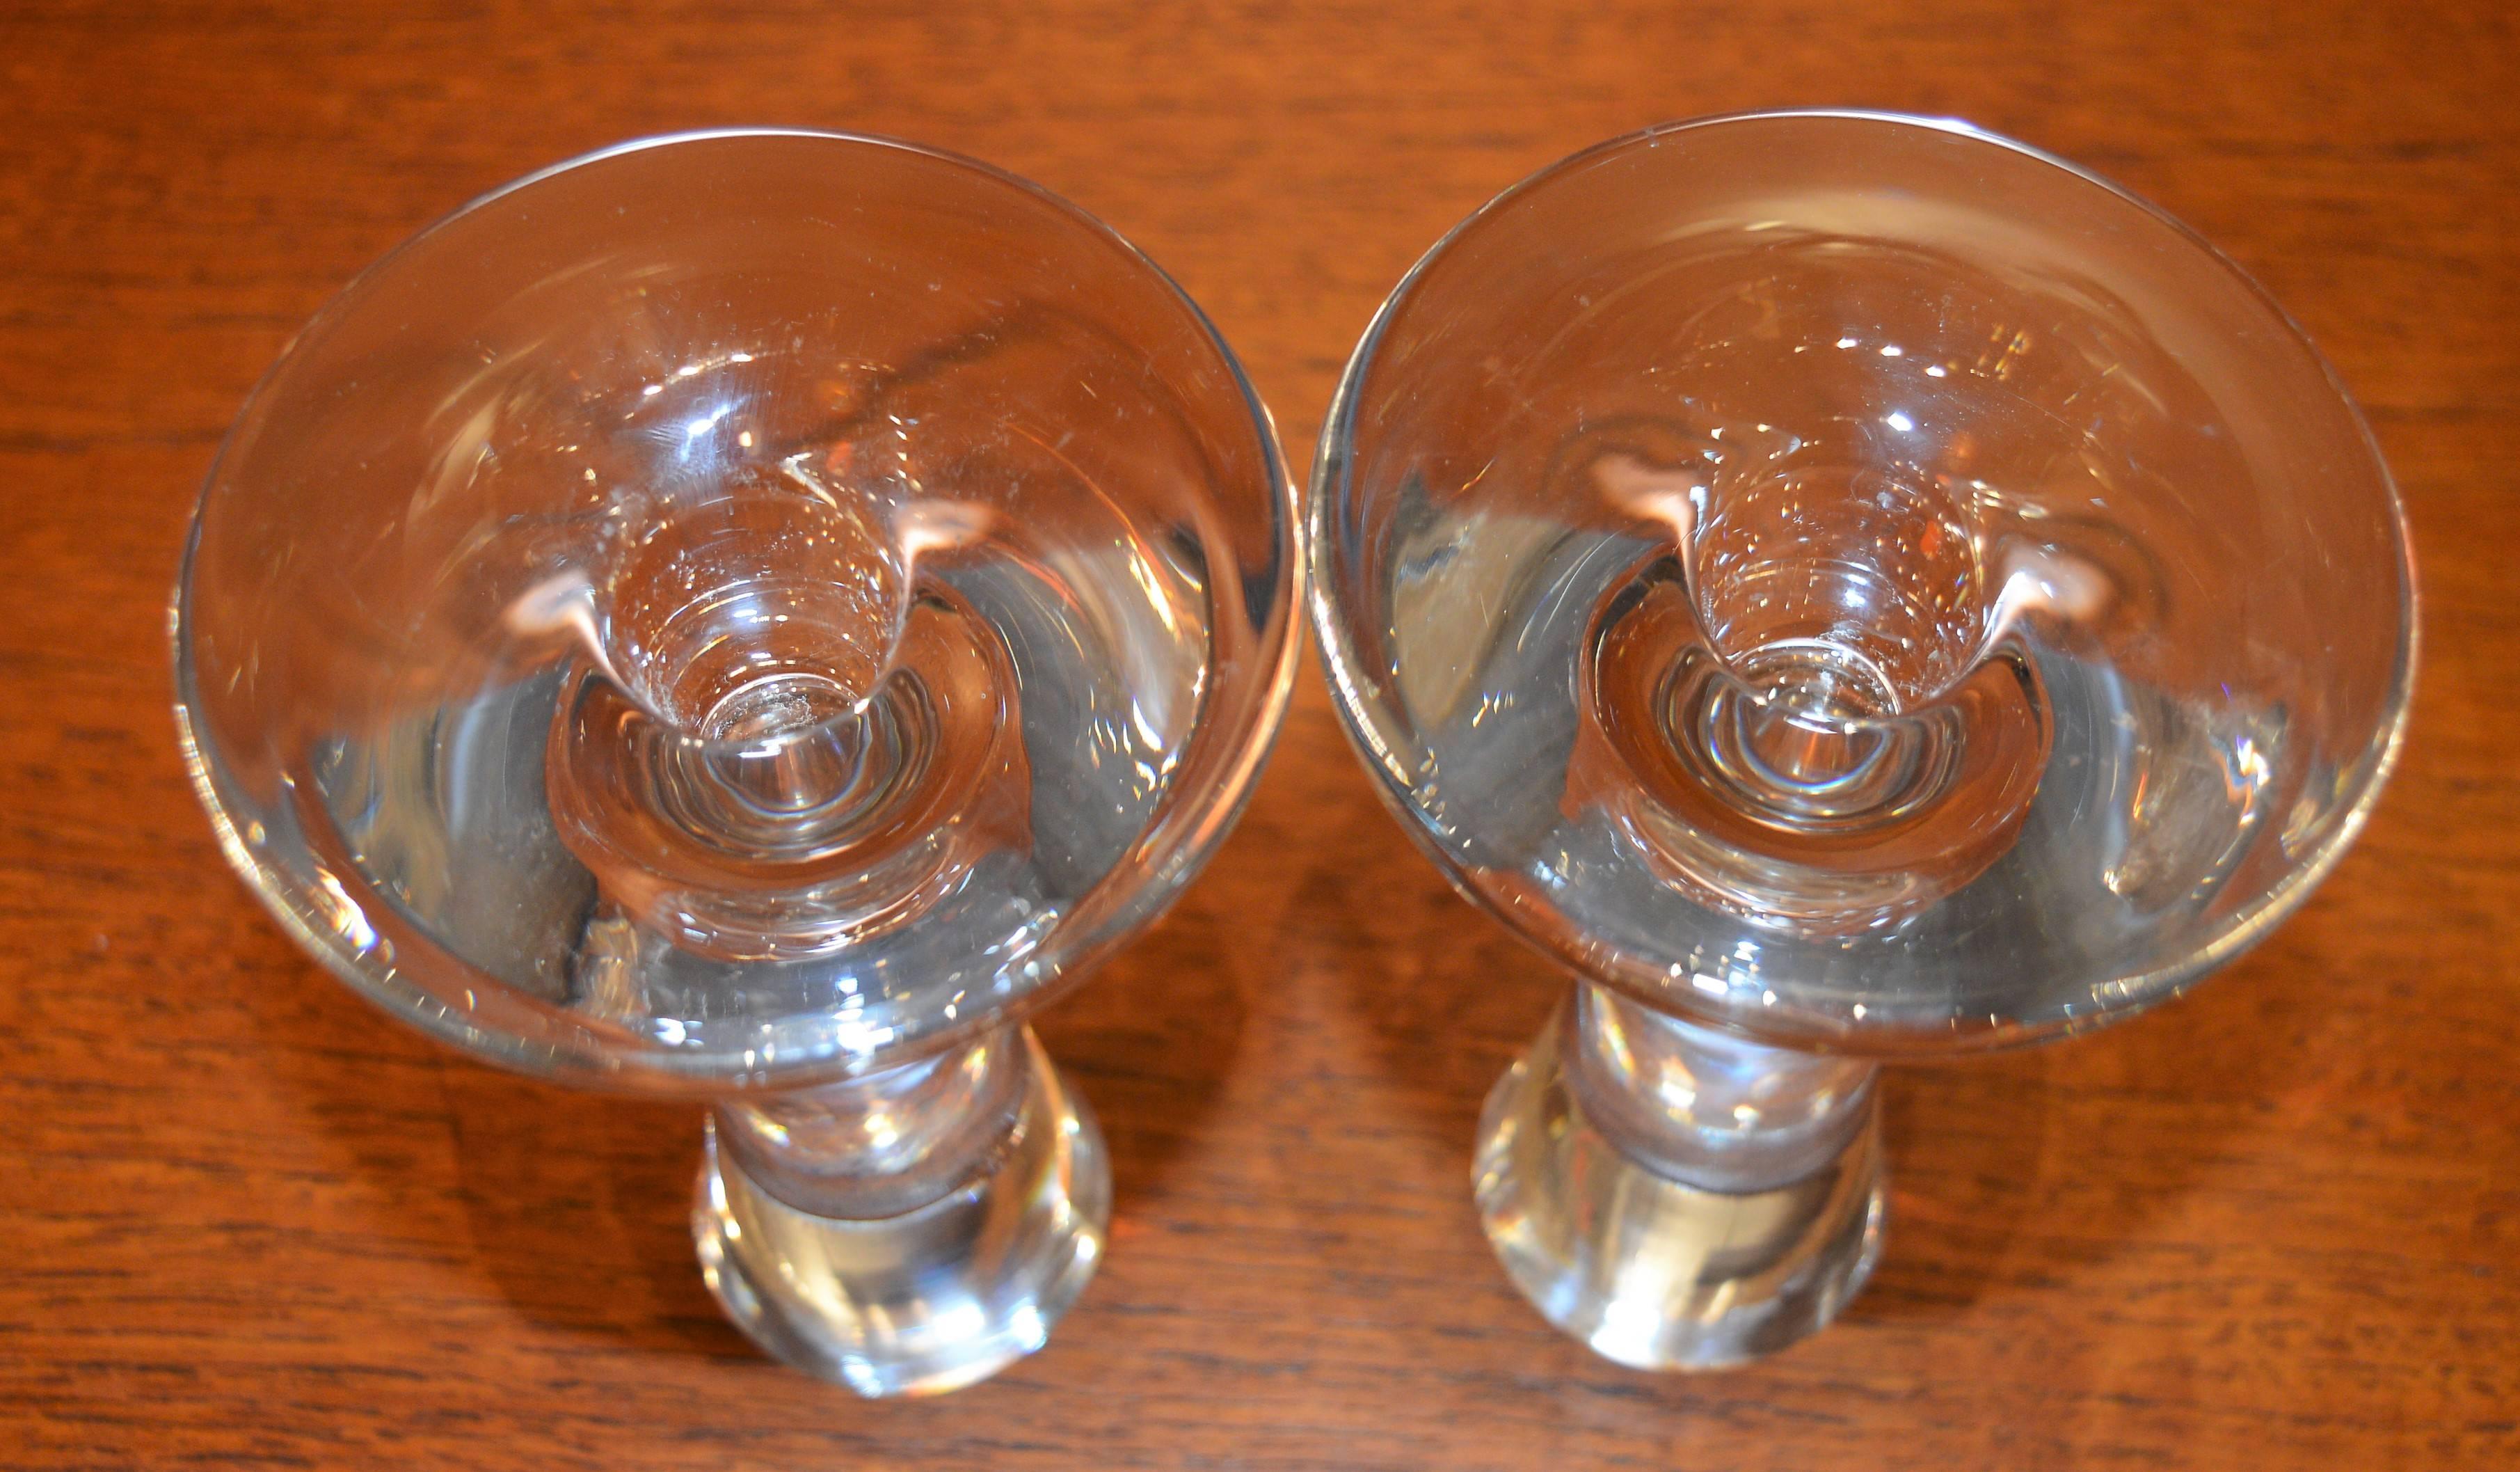 Pair of Tapio Wirkkala Handblown Clear Glass Candlesticks, Signed Iittala In Excellent Condition For Sale In New Westminster, British Columbia